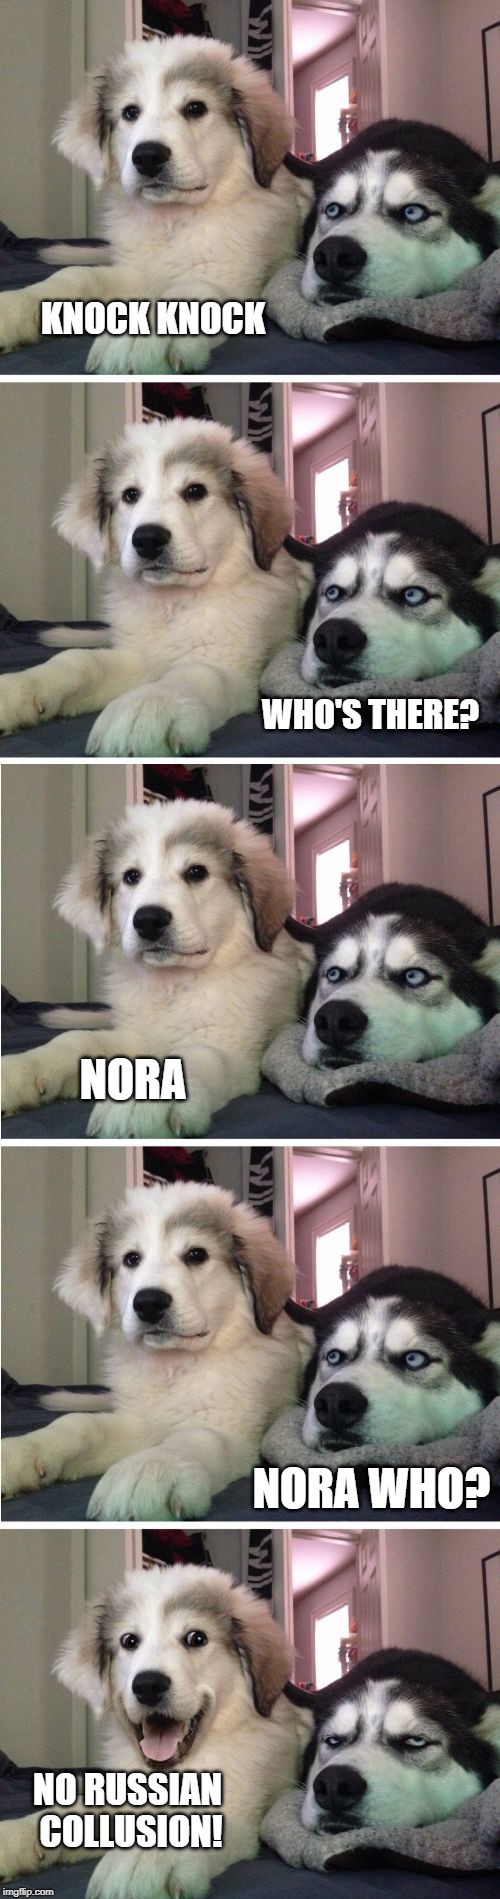 Knock Knock Dogs | KNOCK KNOCK; WHO'S THERE? NORA; NORA WHO? NO RUSSIAN COLLUSION! | image tagged in knock knock dogs | made w/ Imgflip meme maker